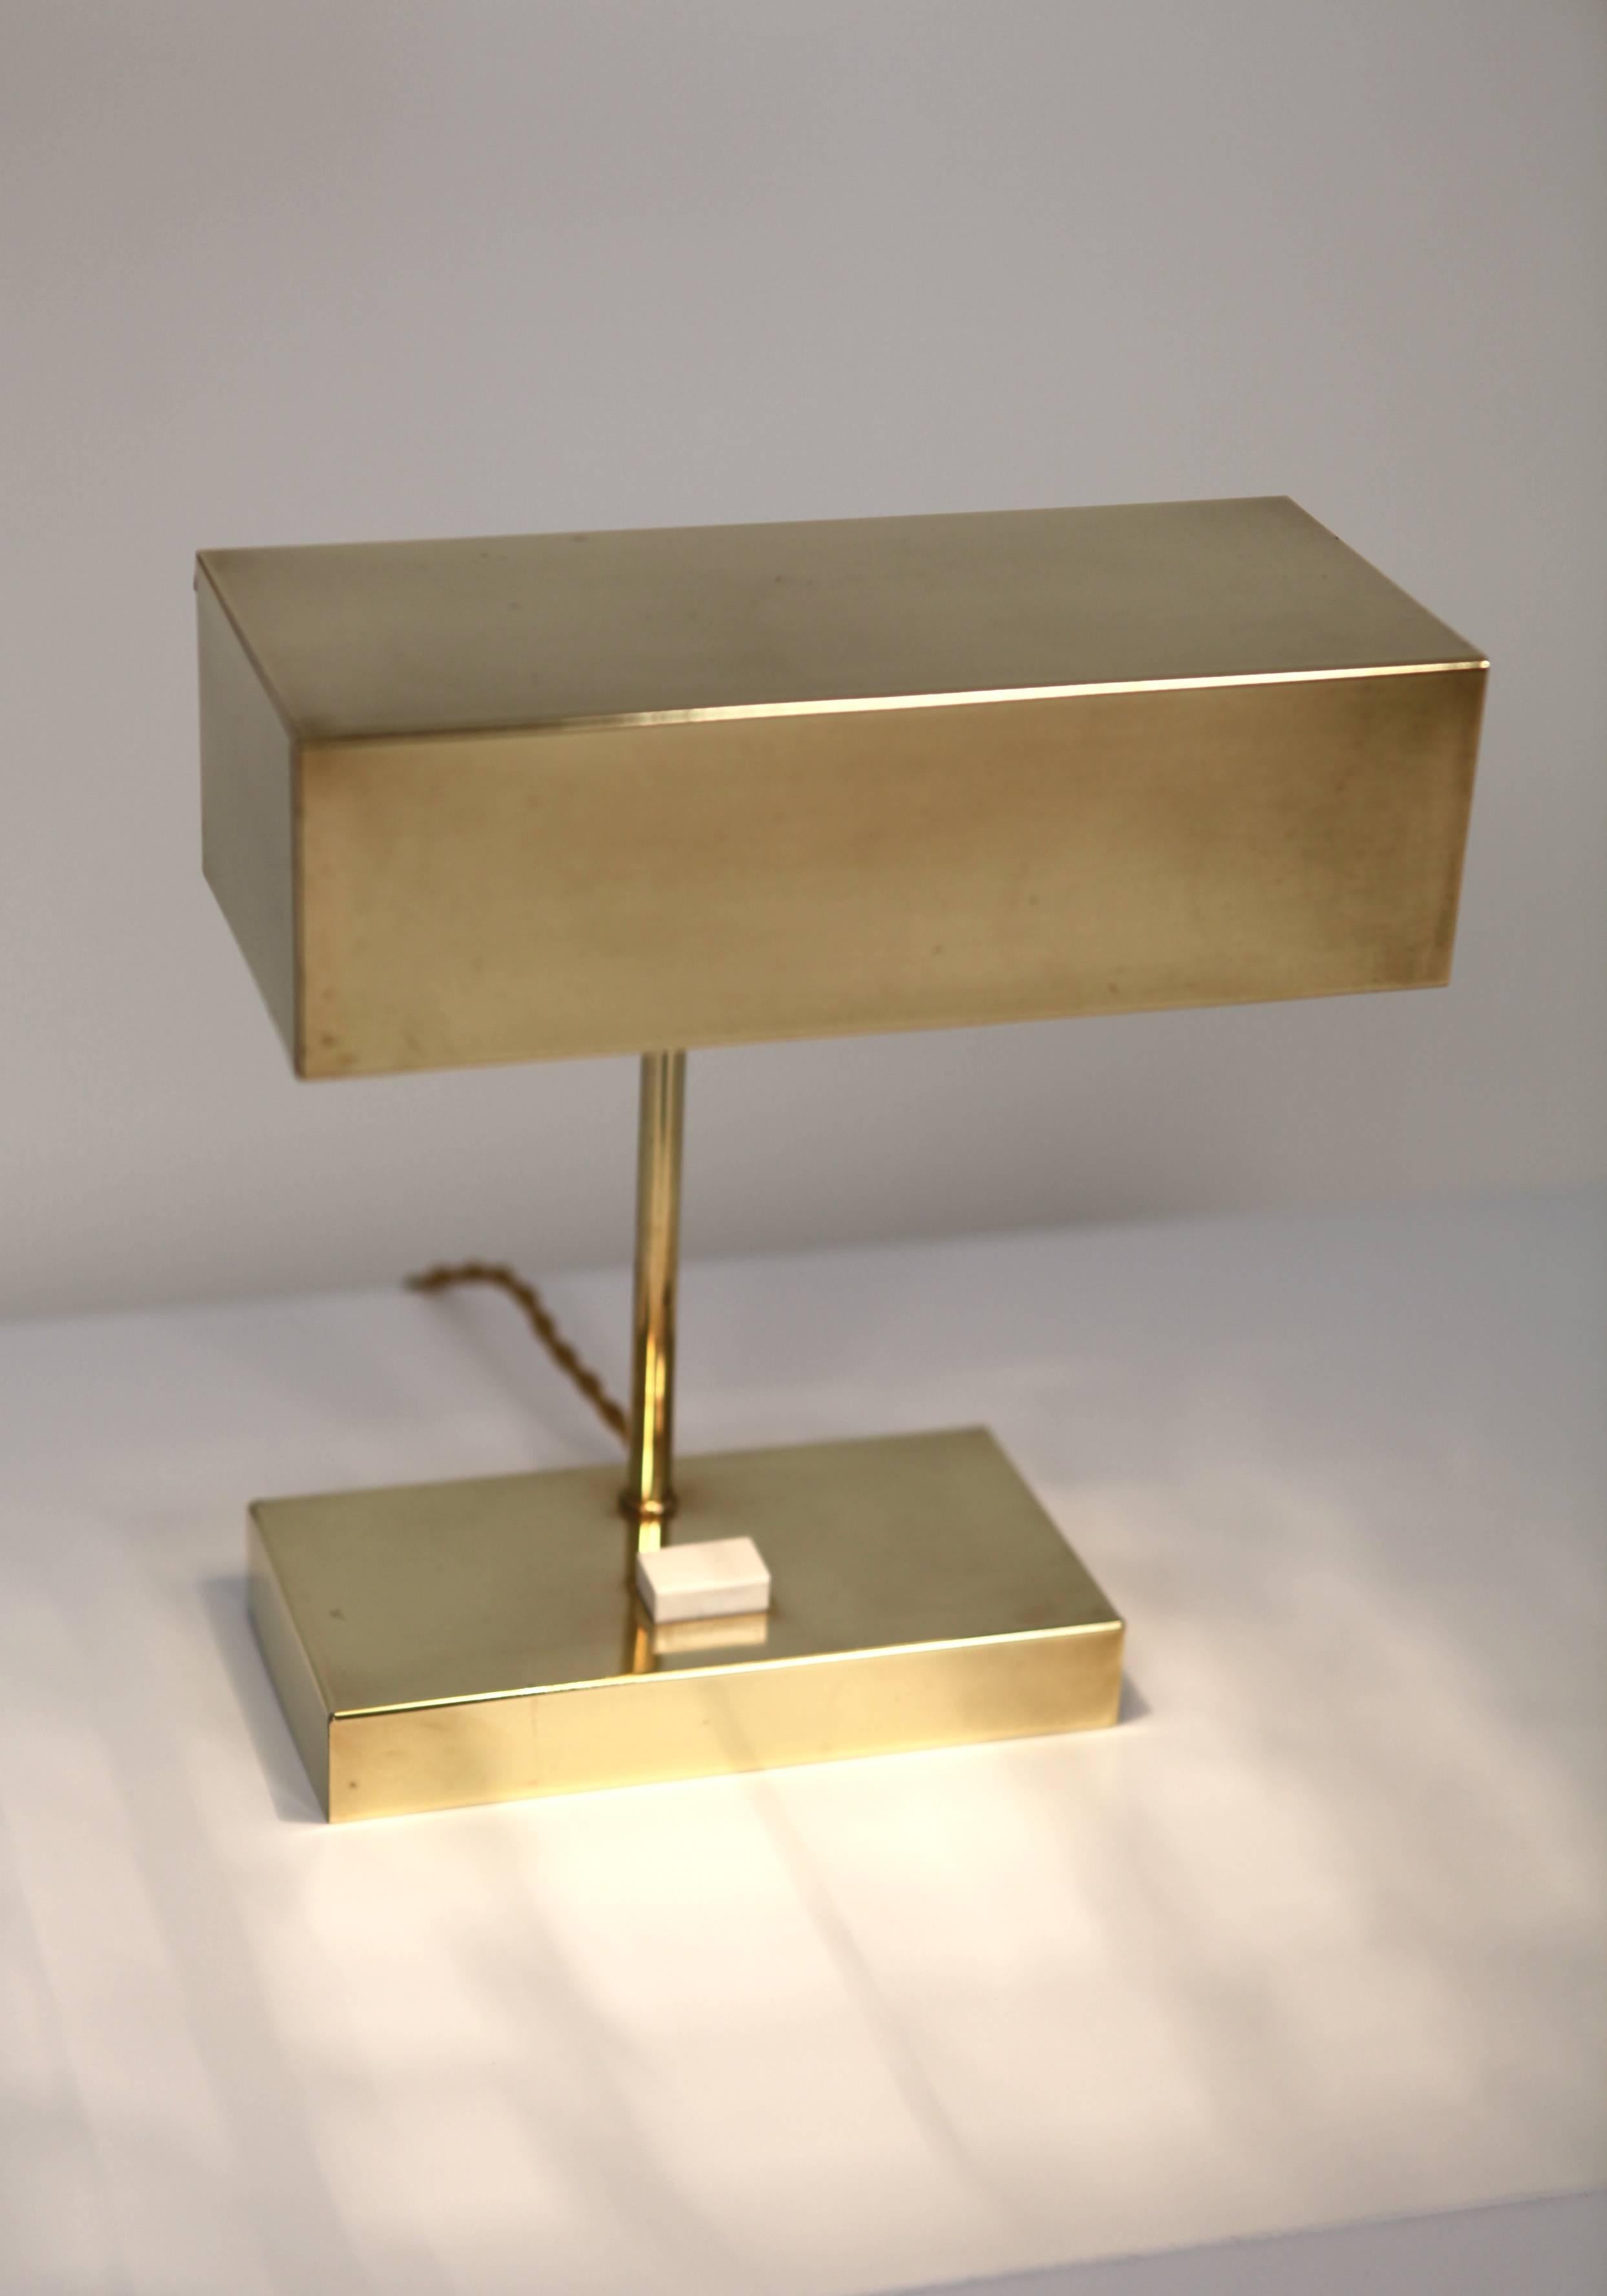 Hans Agne Jacobsson.
Table Lamp in brass
Manufactured by Elidus in Sweden 1960s.
Rewired